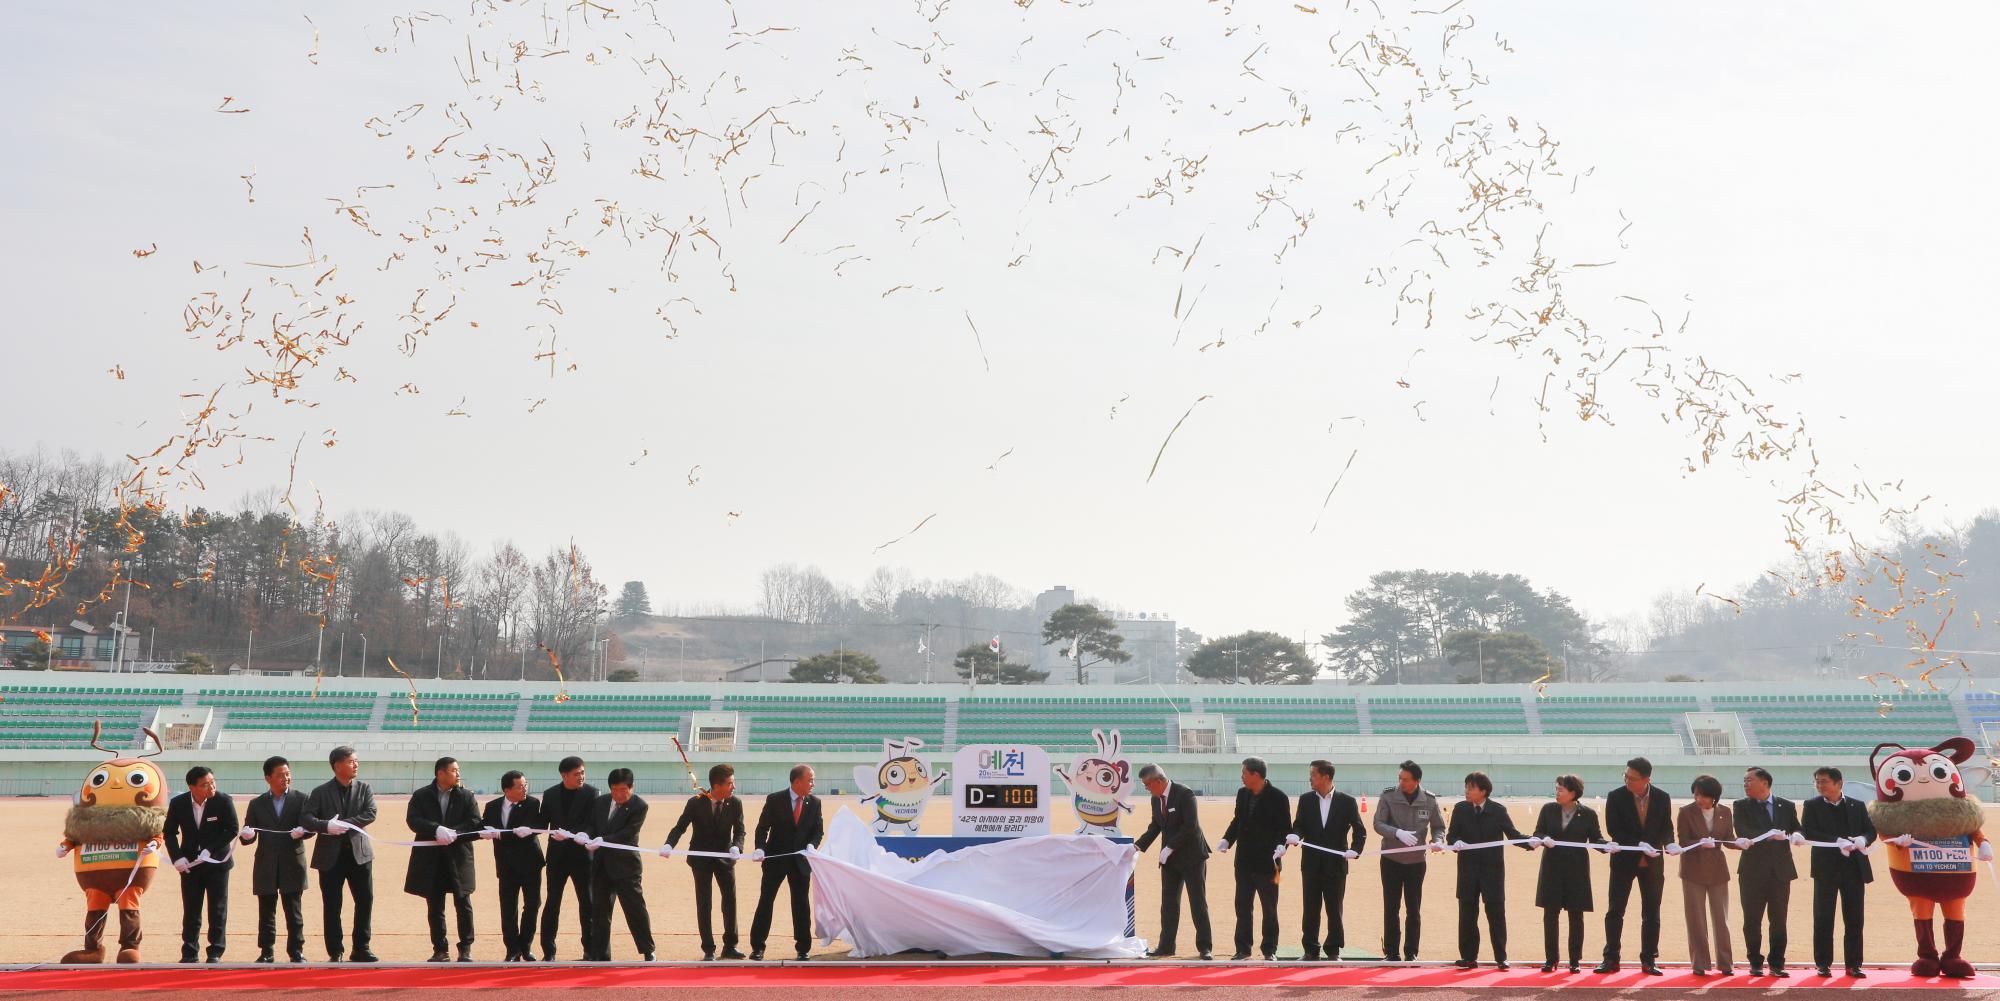 Yecheon Championships D-100 countdown timer unveiling ceremony